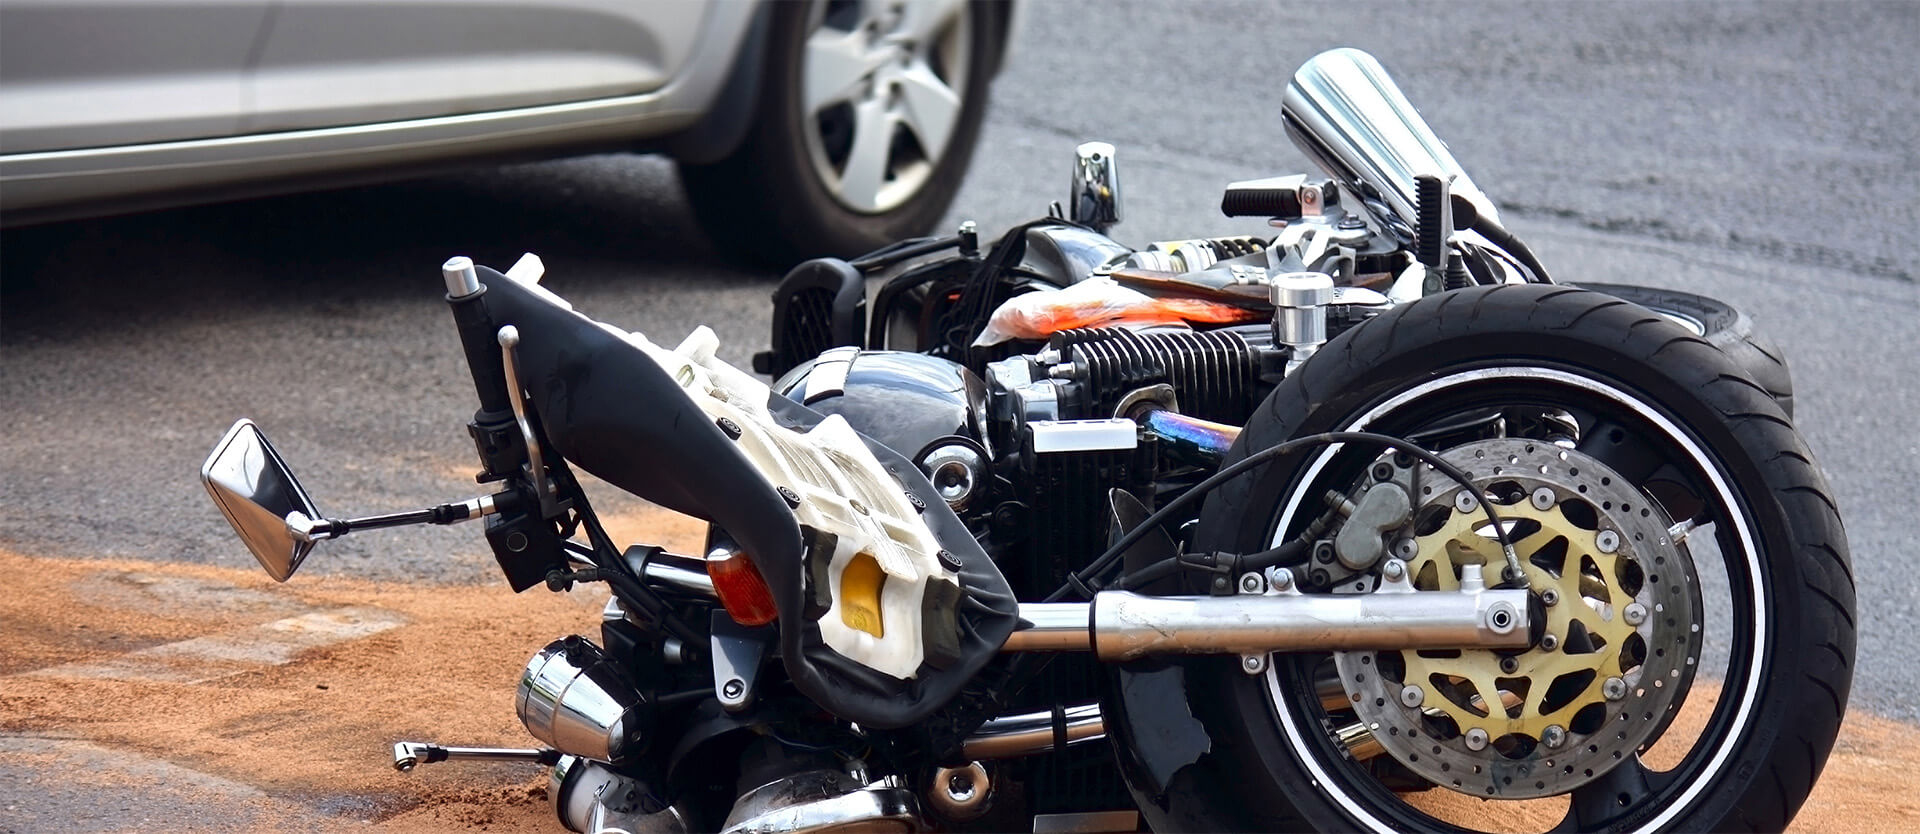 a damaged motorcycle on the road after an accident